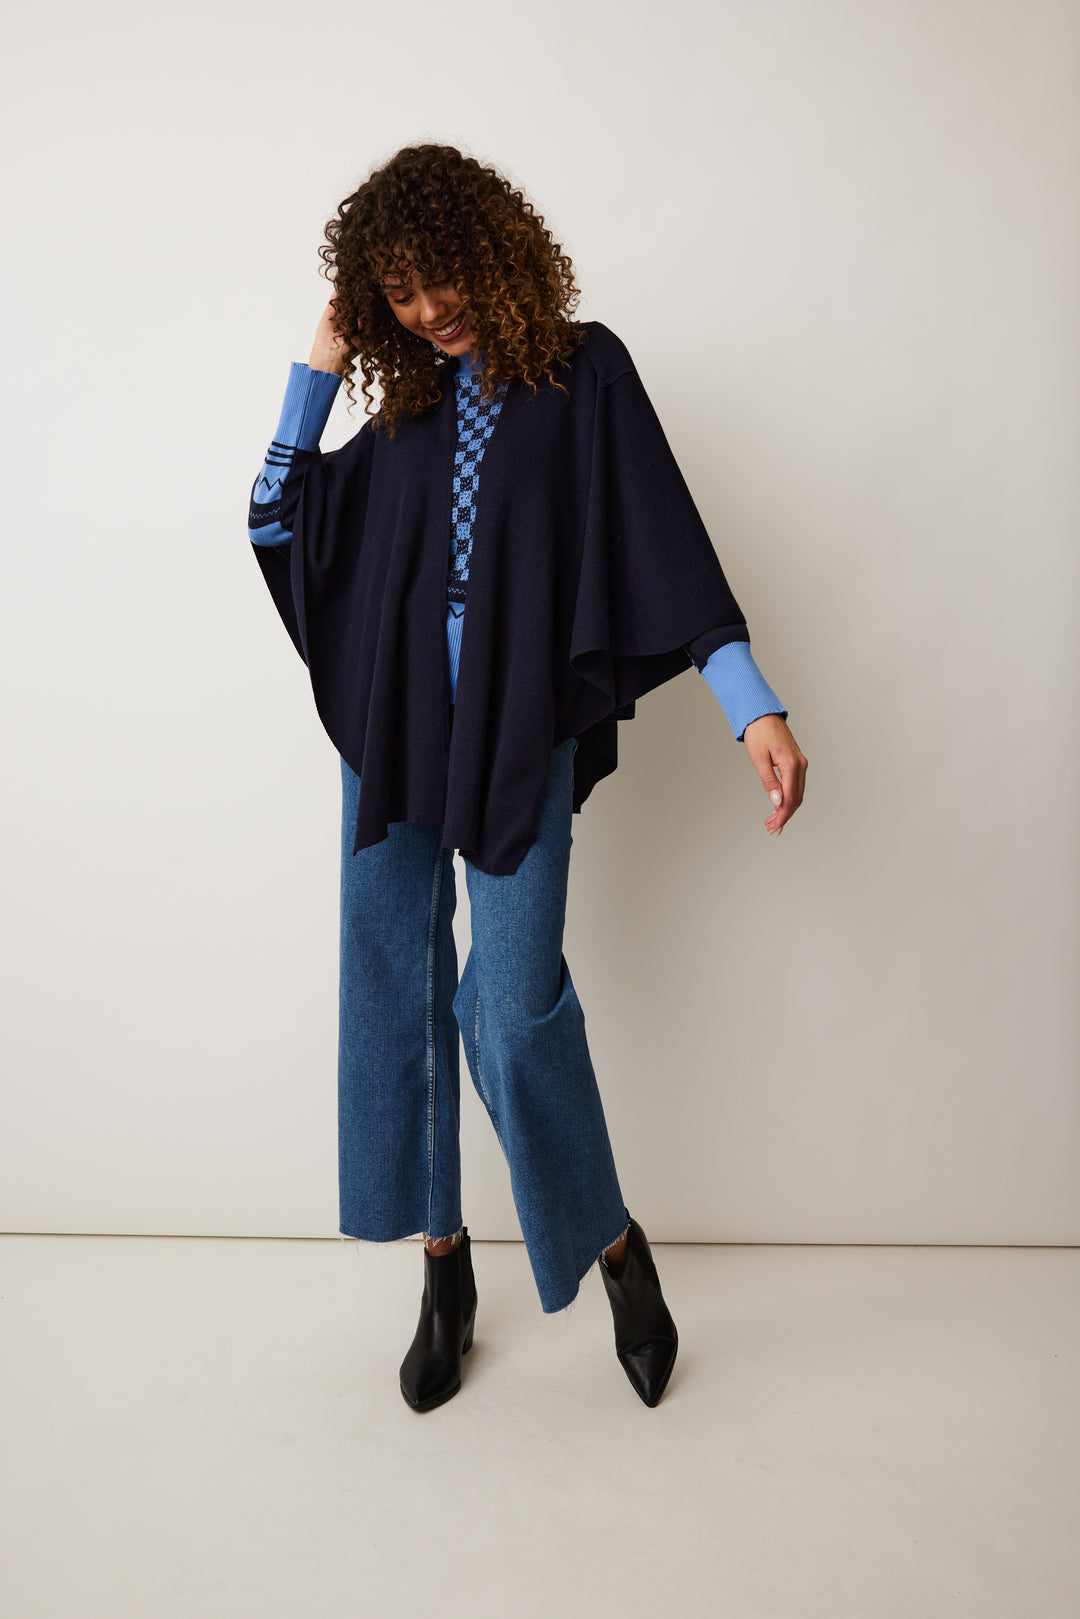 Crafted from a lush soft cotton, our lightweight shawl-style wrap adds a touch of elegance to any outfit, while the arm loops keep the wrap securely in place.